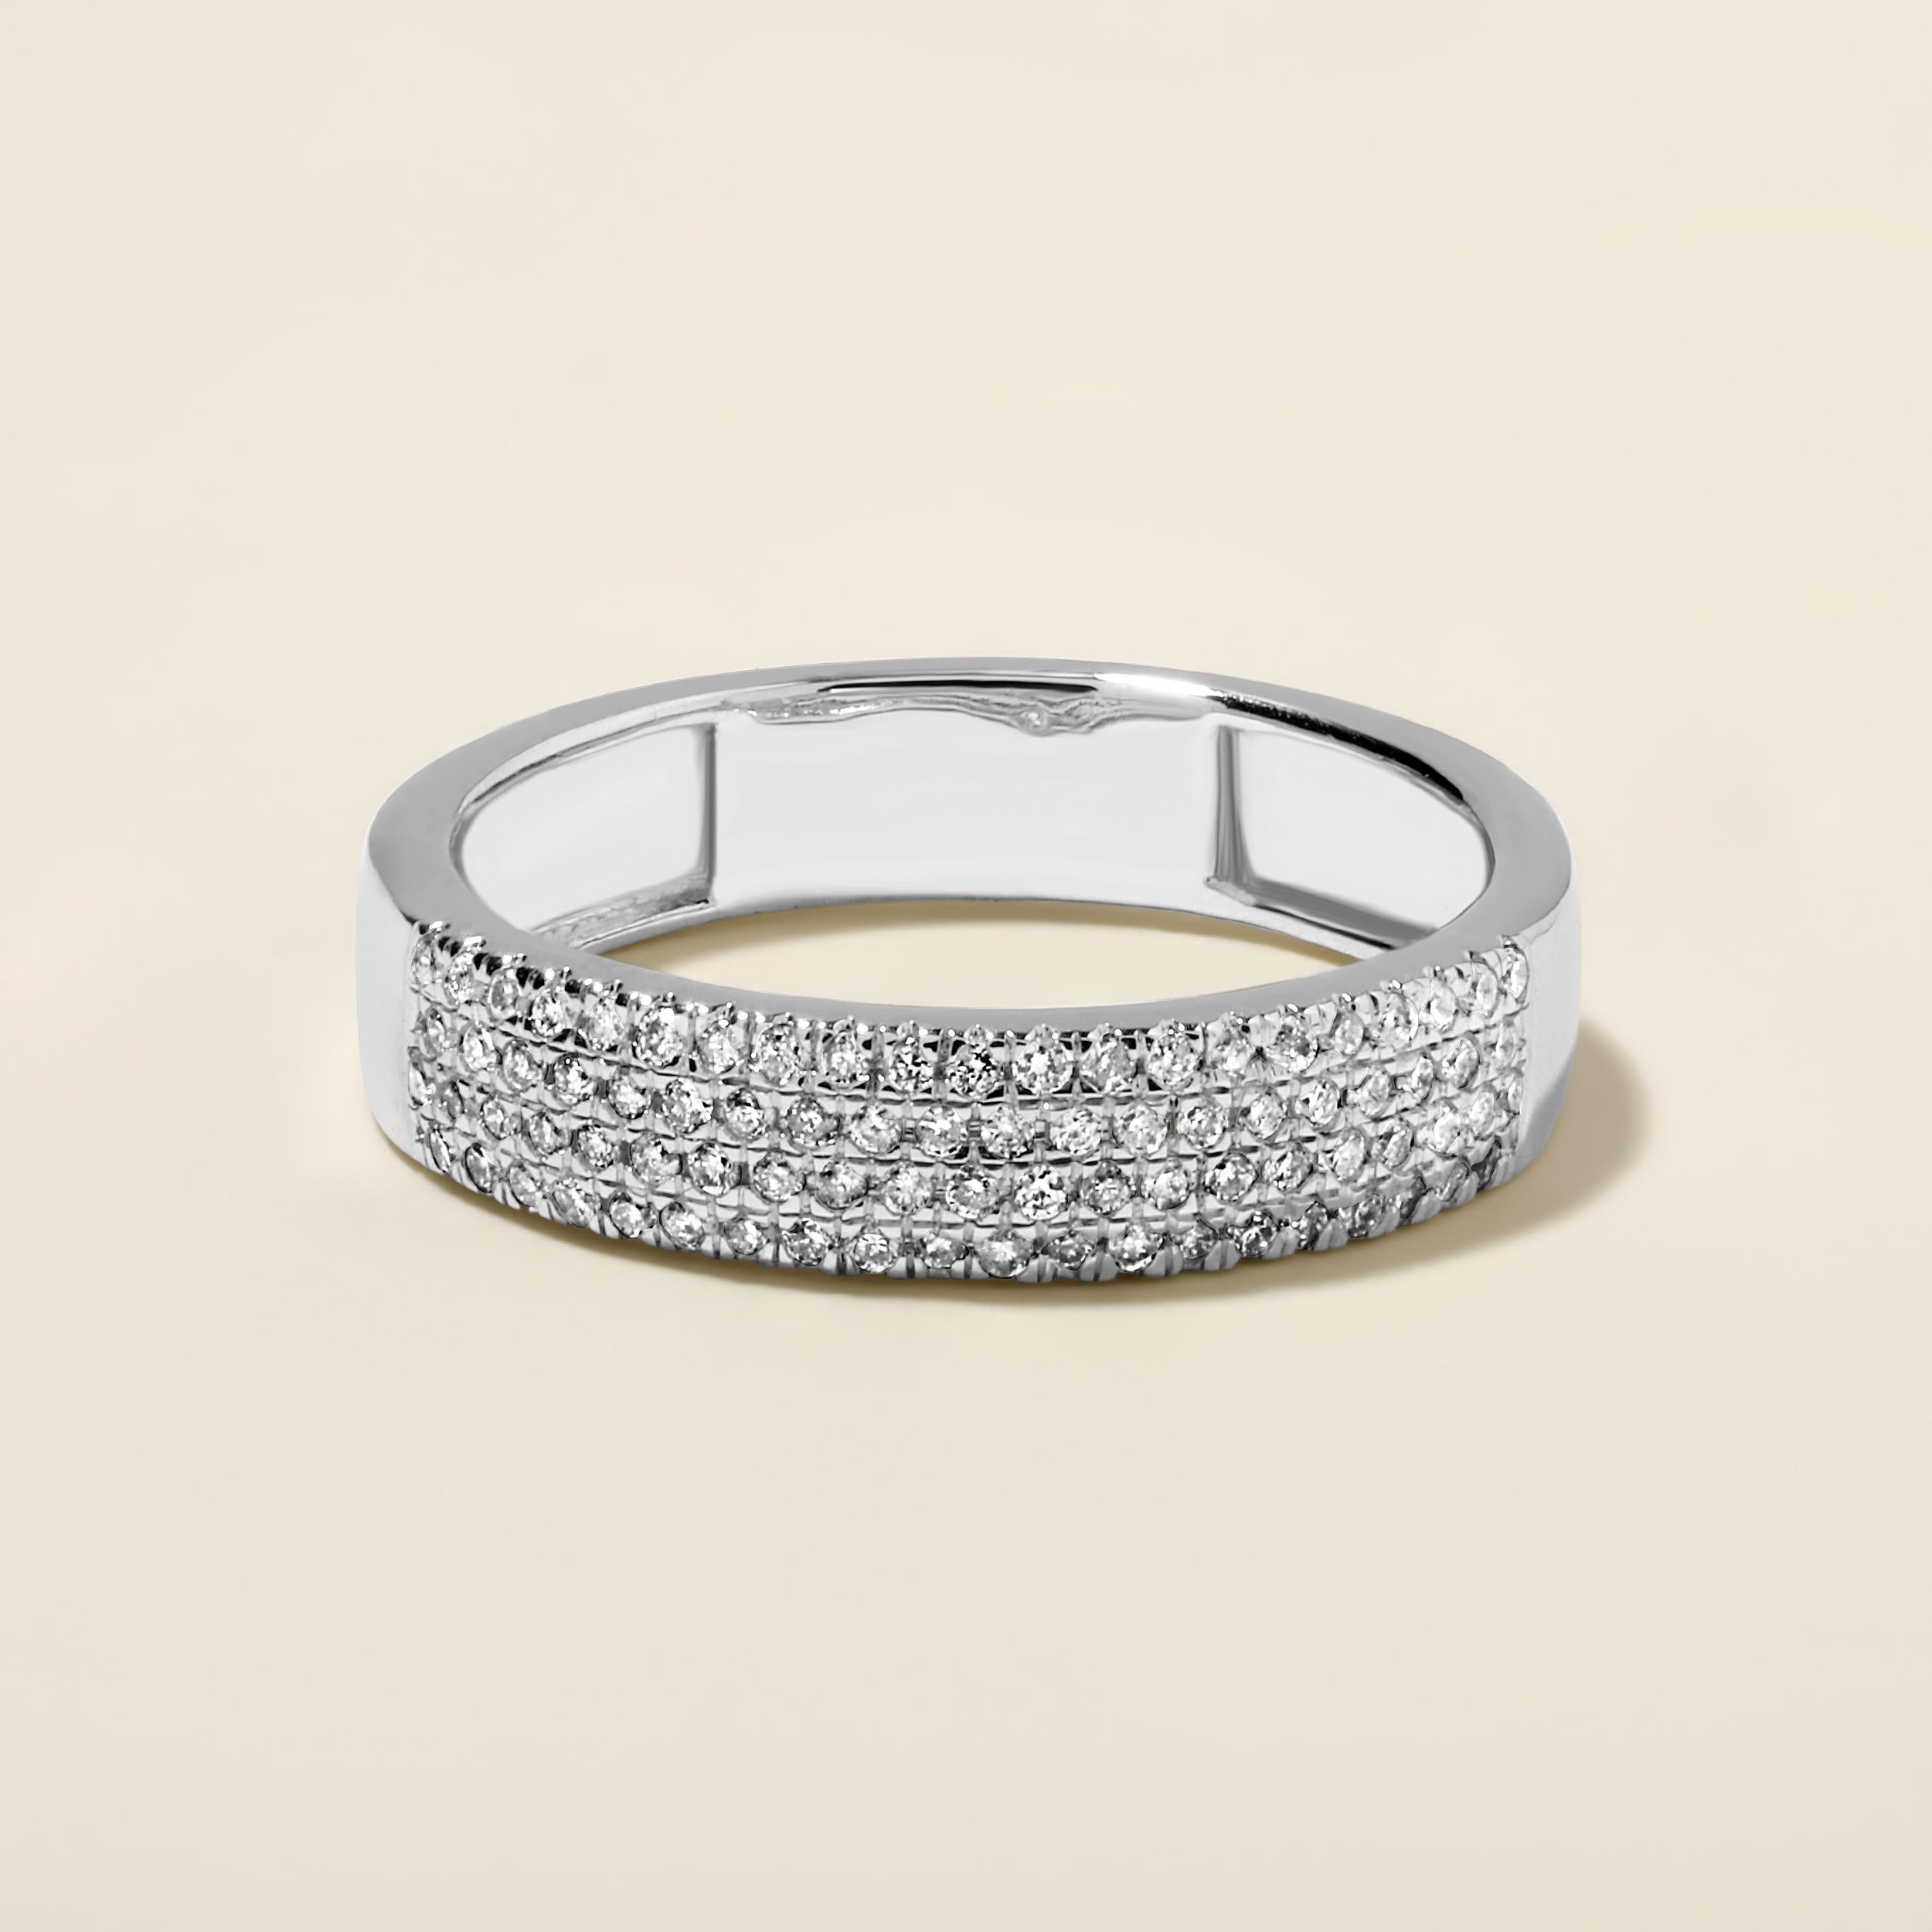 Ring Size: US 7

Crafted in 3.17 grams of 14K White Gold, the ring contains 82 stones of Round Natural Diamonds with a total of 0.29 carat in G-H color and I1-I2 clarity.

CONTEMPORARY AND TIMELESS ESSENCE: Crafted in 14-karat/18-karat with 100%